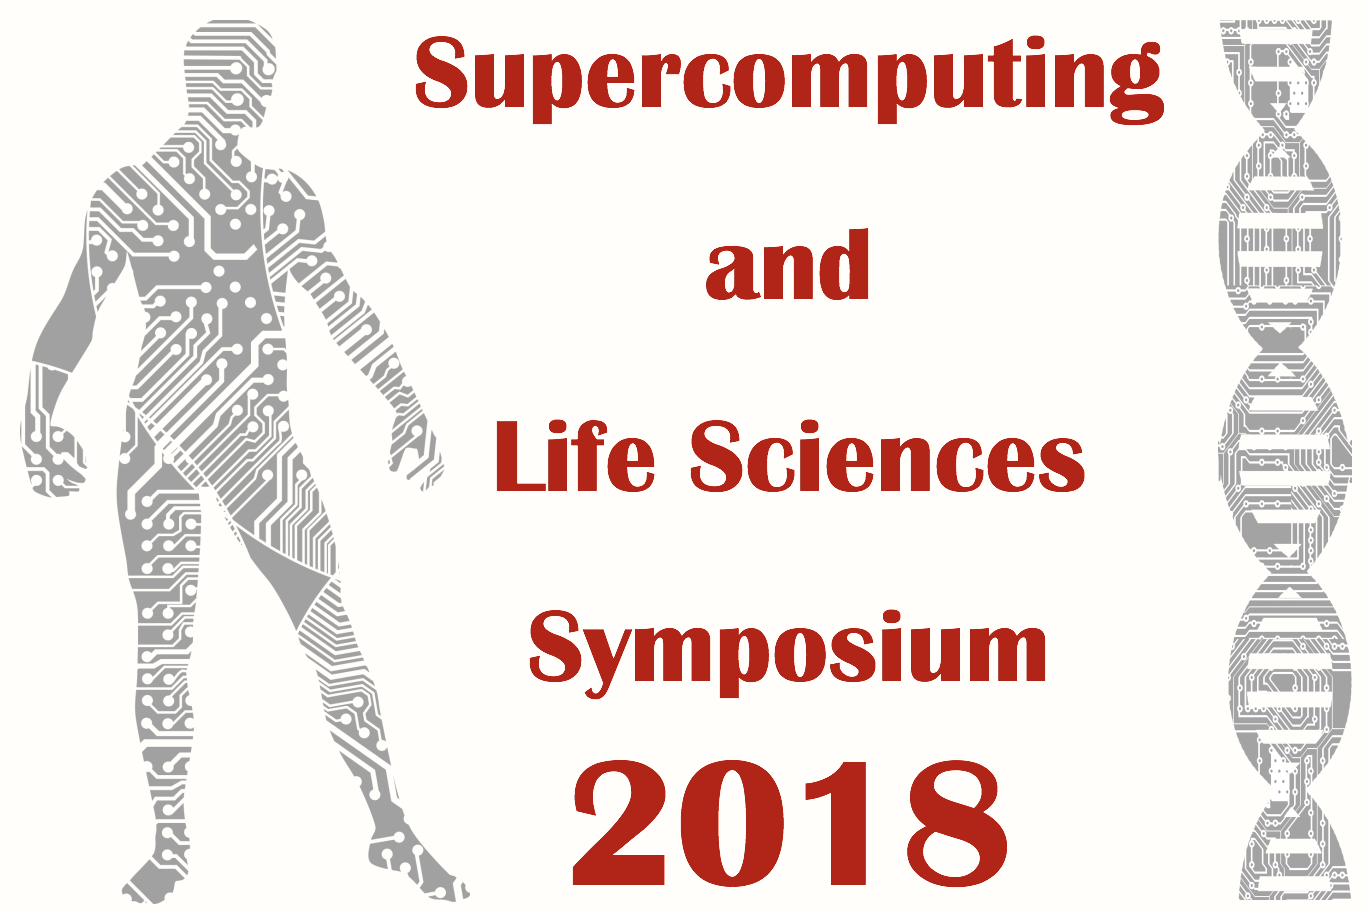 Supercomputing and LIfe Sciences Symposium 2018 will be held March 2nd at the University of Nebraska-Lincoln.